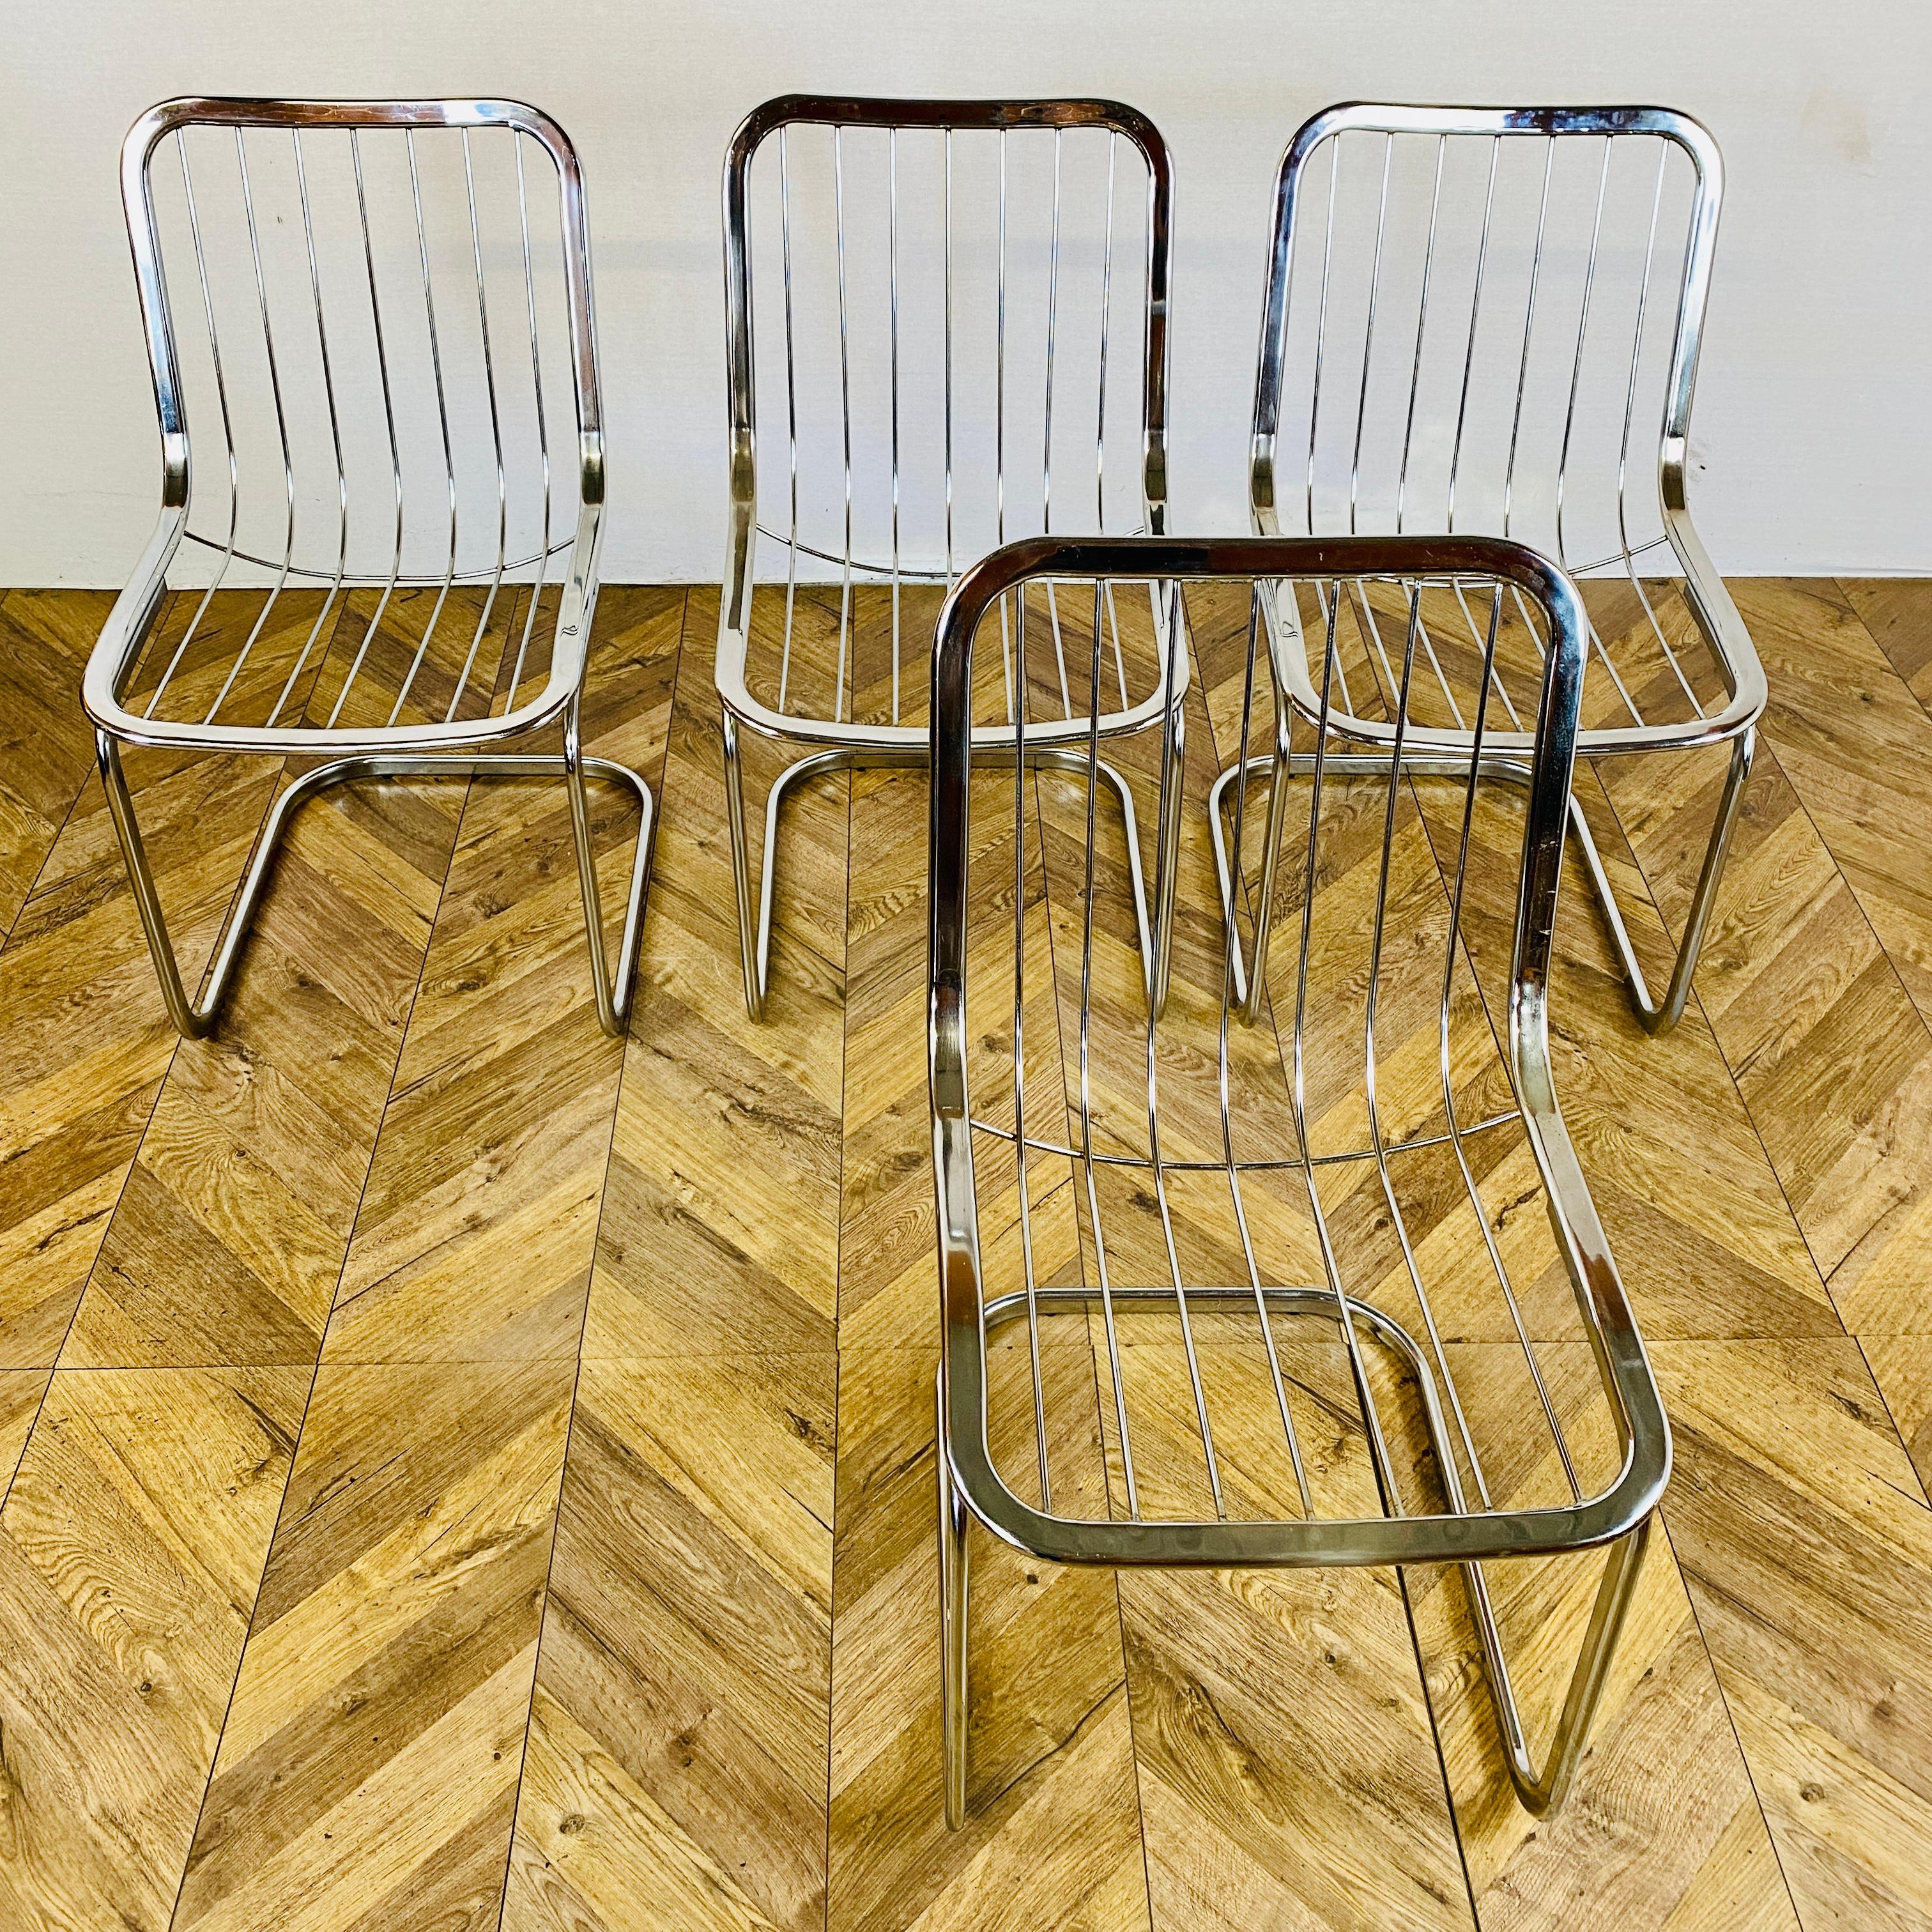 Set of 4, vintage mid century chrome dining chairs designed by Gastone Rinaldi, circa 1970s. Made in Italy.

The chairs are made from chrome with original velour seats.

The chairs are in great condition, but in-keeping with their age and usage